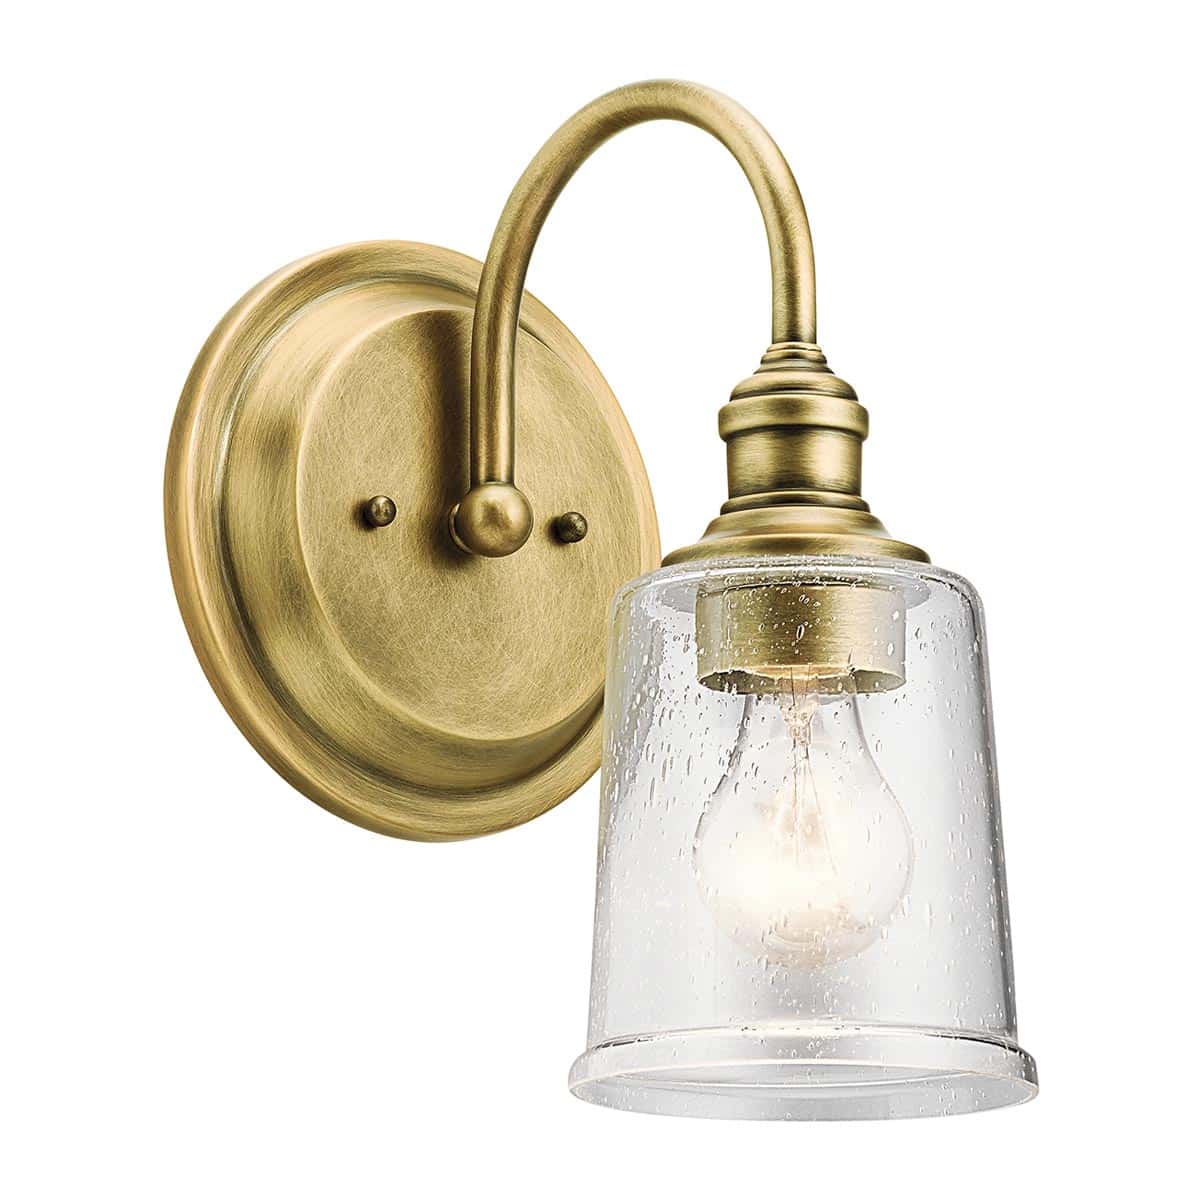 Kichler Waverly Natural Brass Single Wall Light Seeded Glass Shade